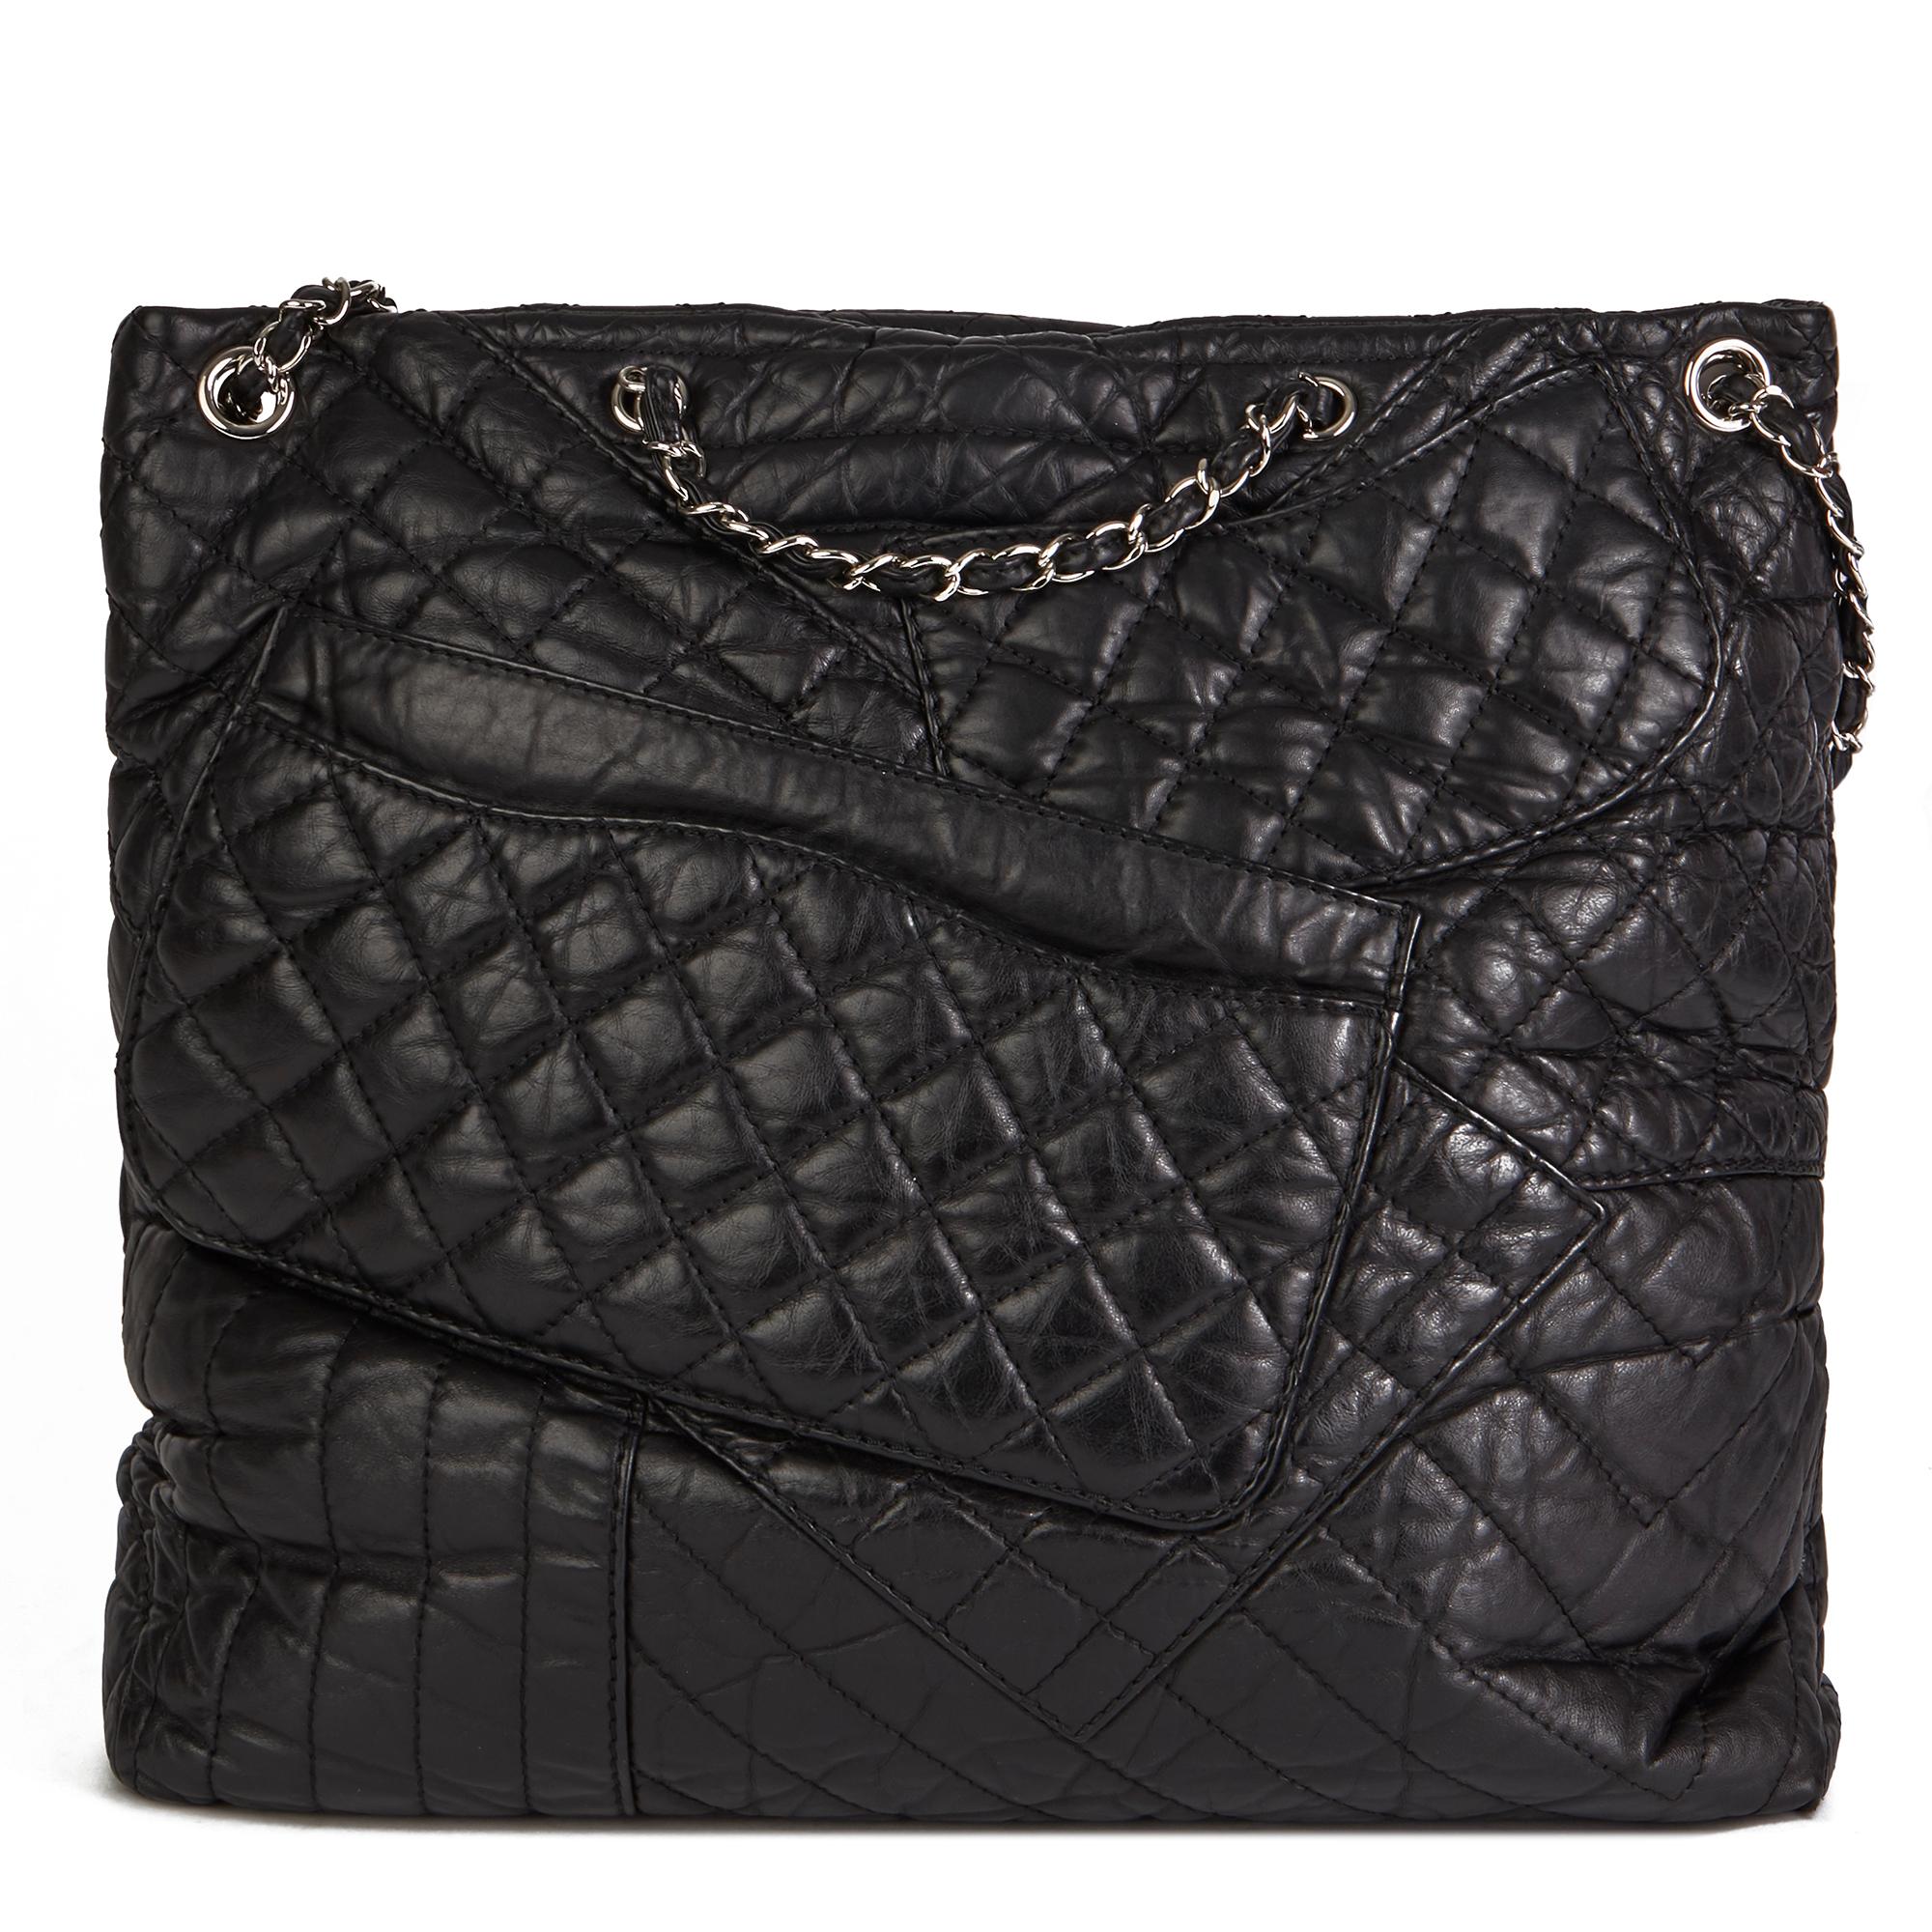 2010 Chanel Black Quilted Aged Calfskin Leather Fantasy Shopping Tote 1